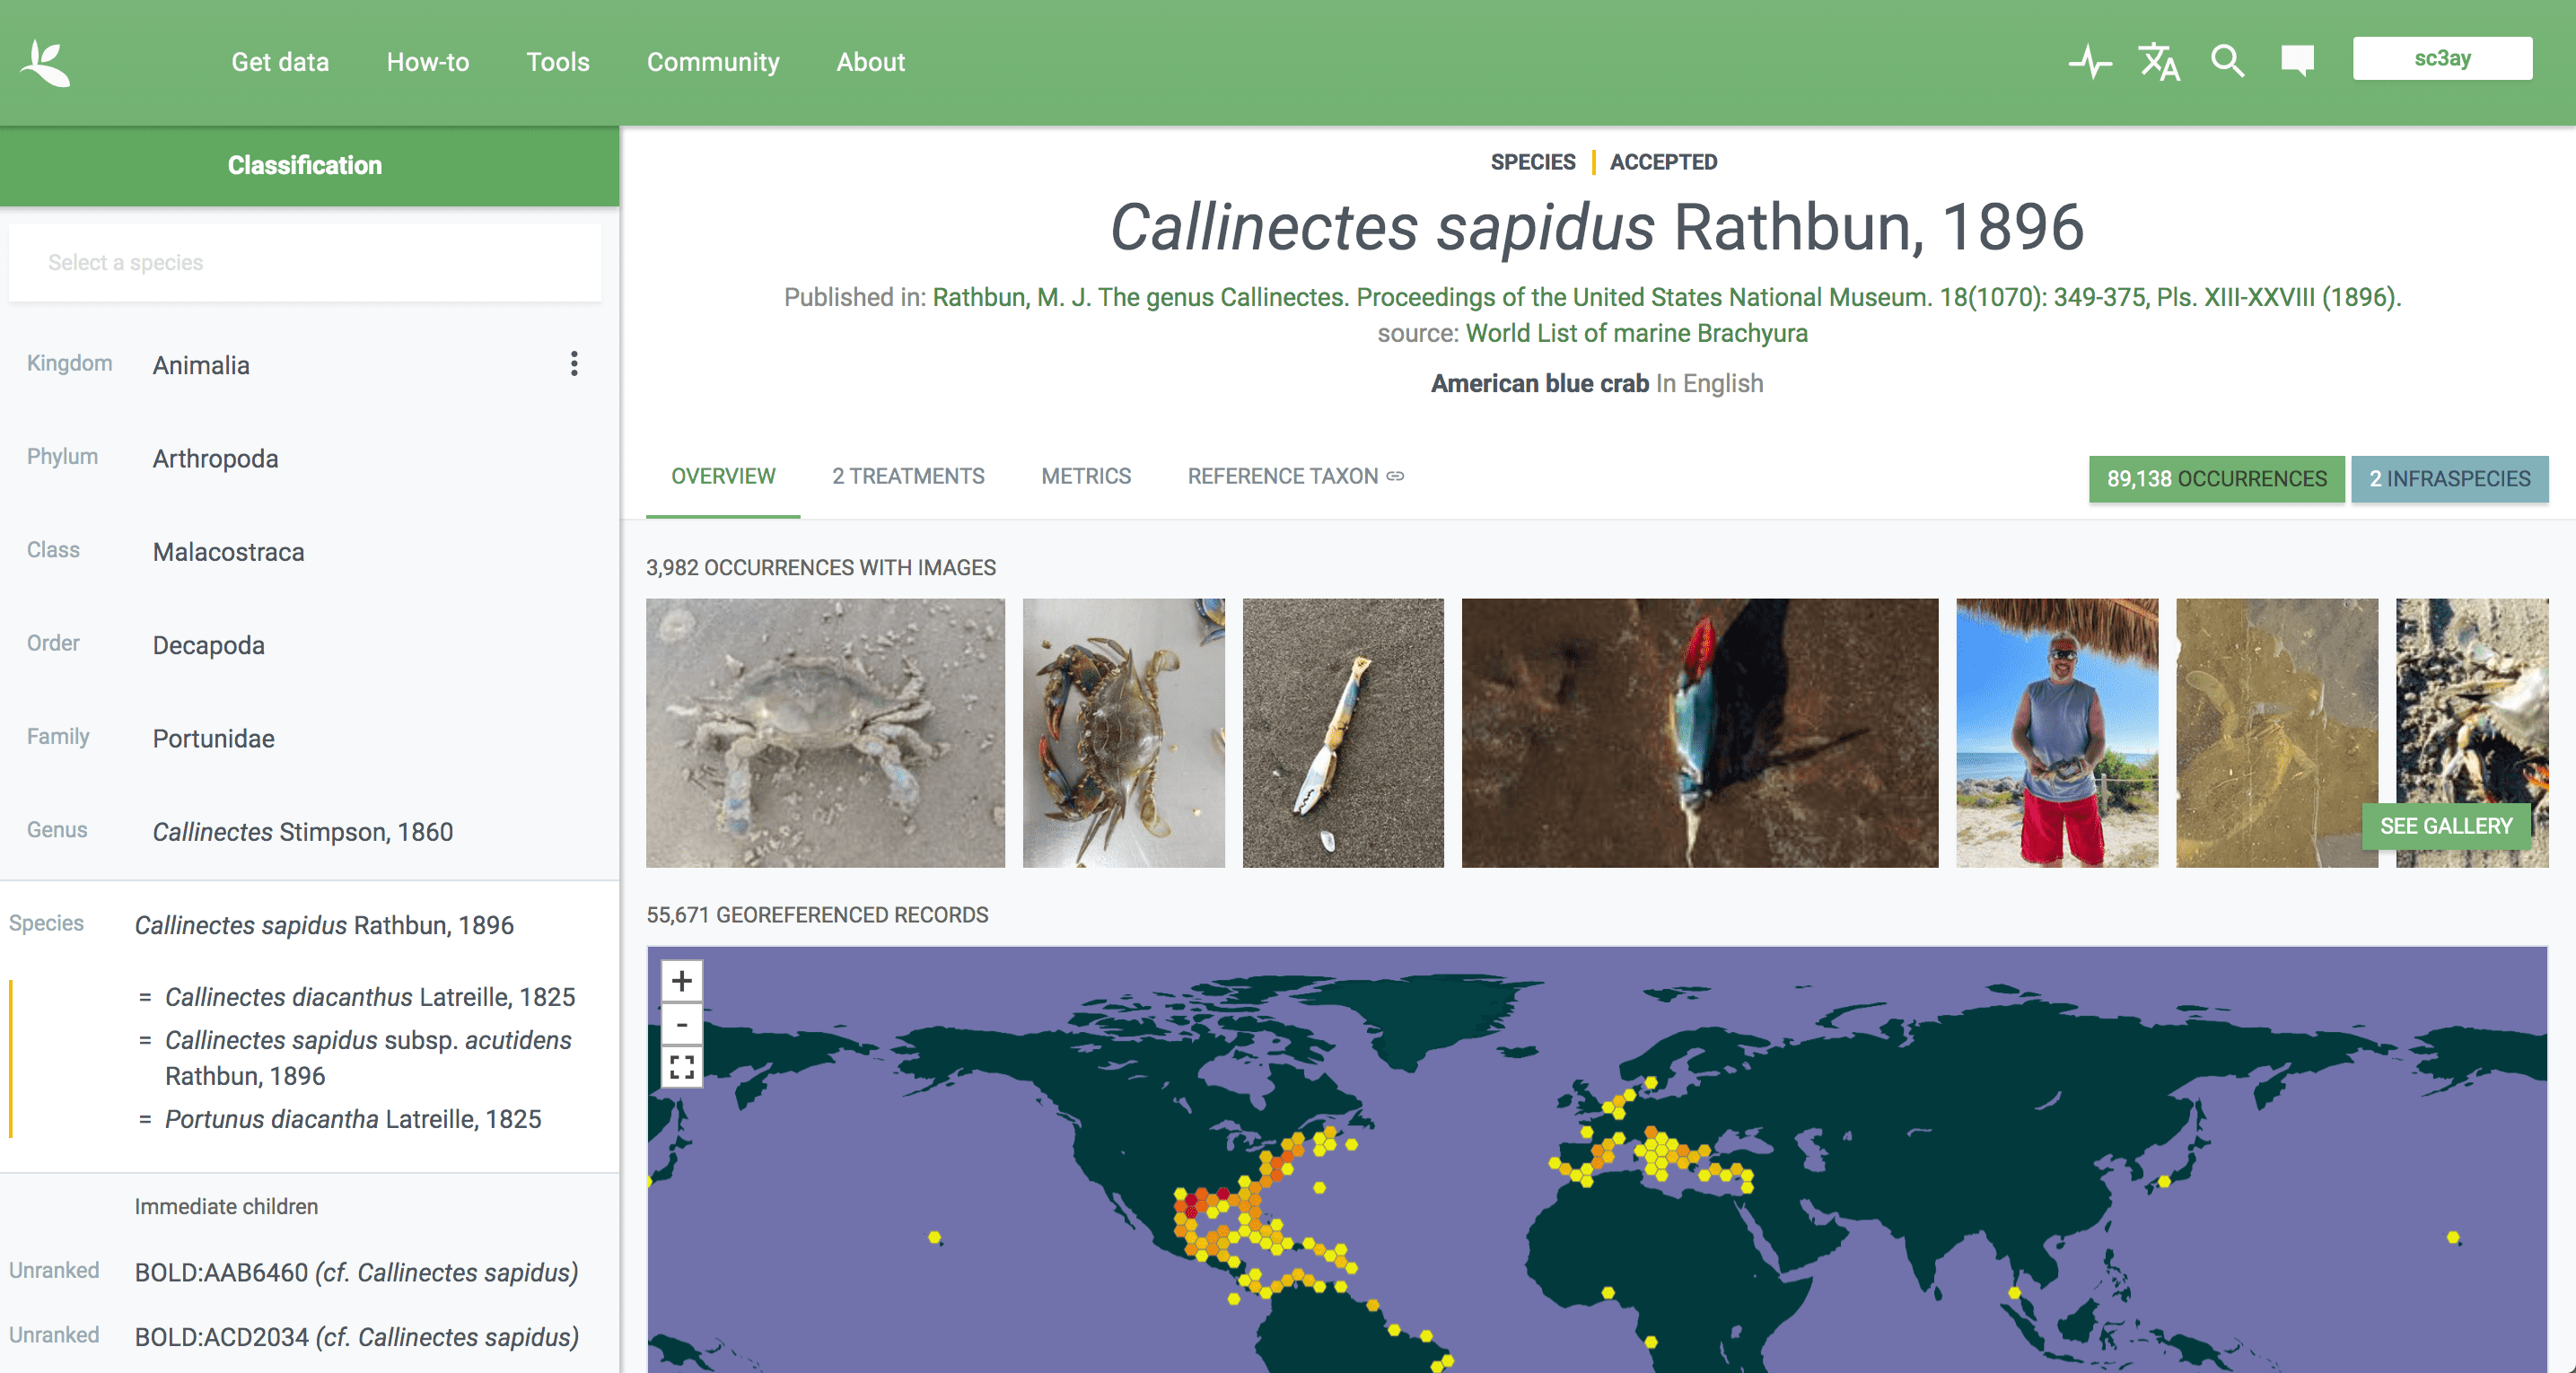 Image of the “Species” information page. The pane on the left shows taxonomic info at each level of taxonomy. The right side says “Callinectes sapidus Rathbun, 1896”. You can see that there are 3982 occurrences with images associated with them, and there are 55671 georeferenced occurrences shown on a map.